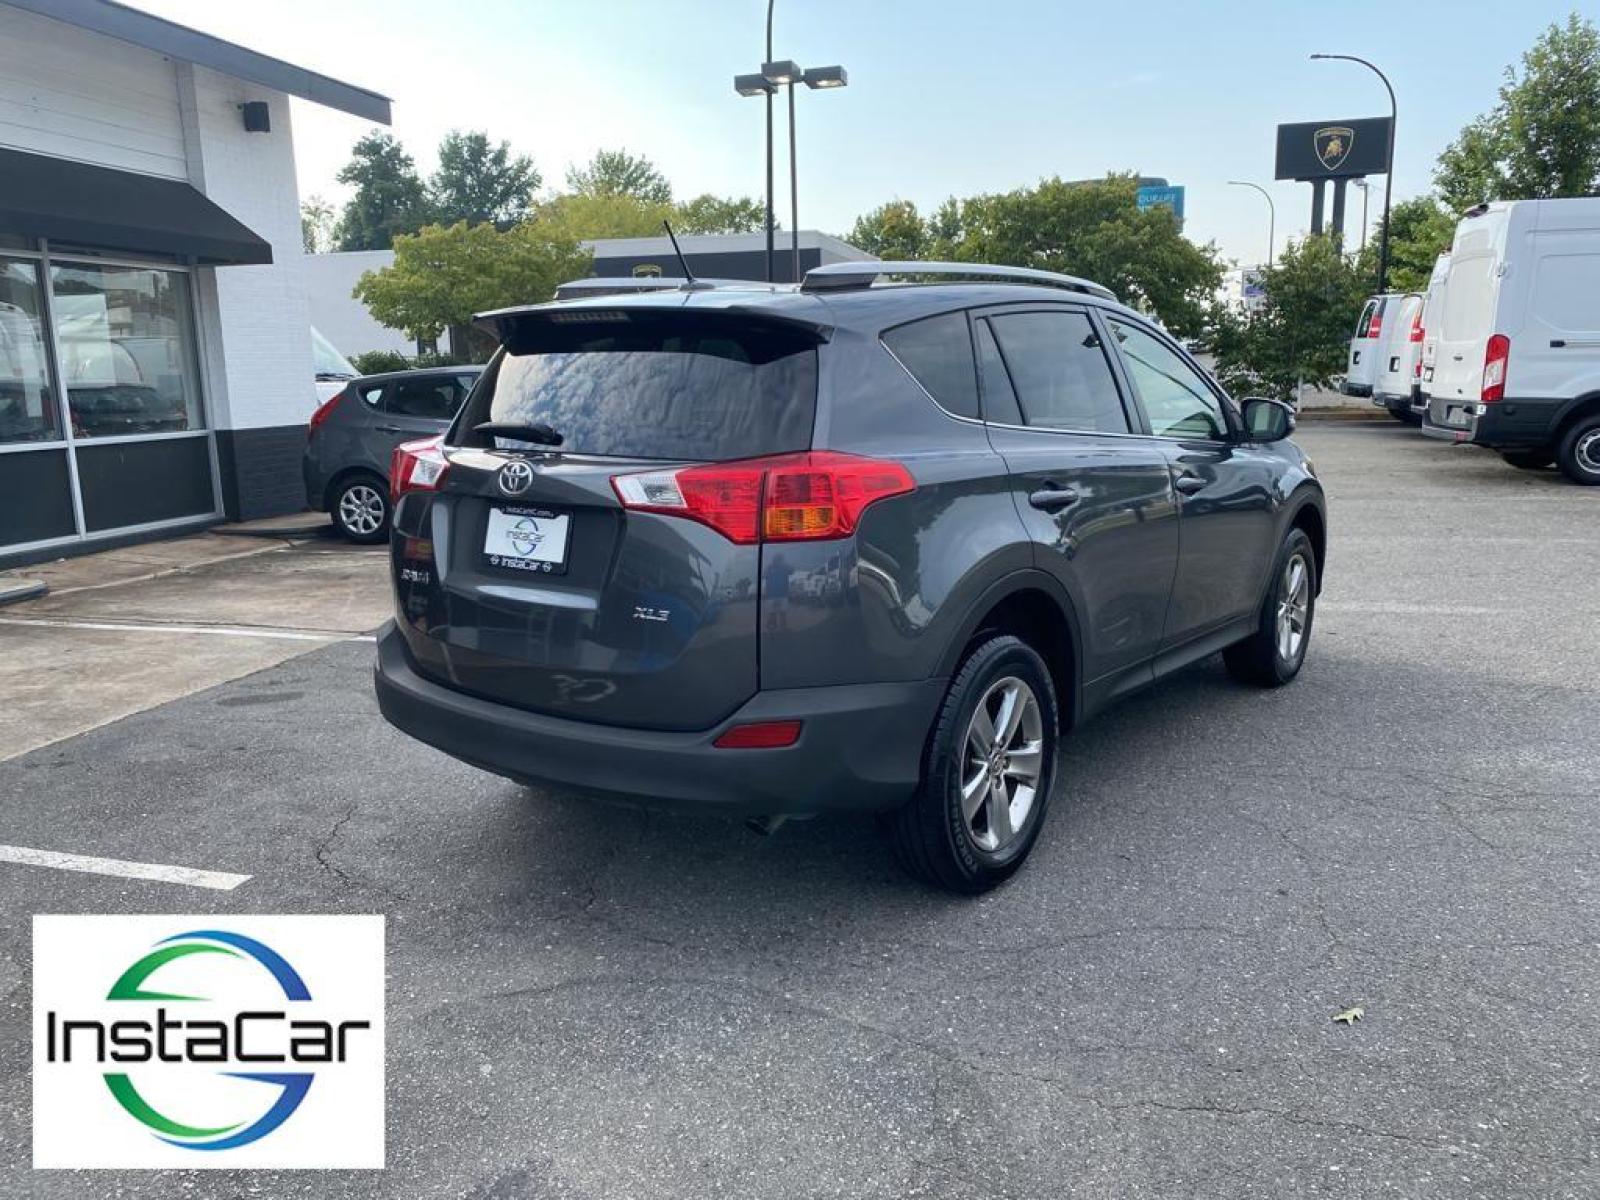 2015 Magnetic Gray Metallic /Black Toyota RAV4 XLE (JTMWFREV6FD) with an L4, 2.5L engine, 6-speed automatic transmission, located at 3147 E Independence Blvd, Charlotte, NC, 28205, 35.200268, -80.773651 - <b>Equipment</b><br>This model features a hands-free Bluetooth phone system. This small suv is equipped with the latest generation of XM/Sirius Radio. See what's behind you with the back up camera on this small suv. The satellite radio system in this Toyota RAV4 gives you access to hundreds of natio - Photo #13